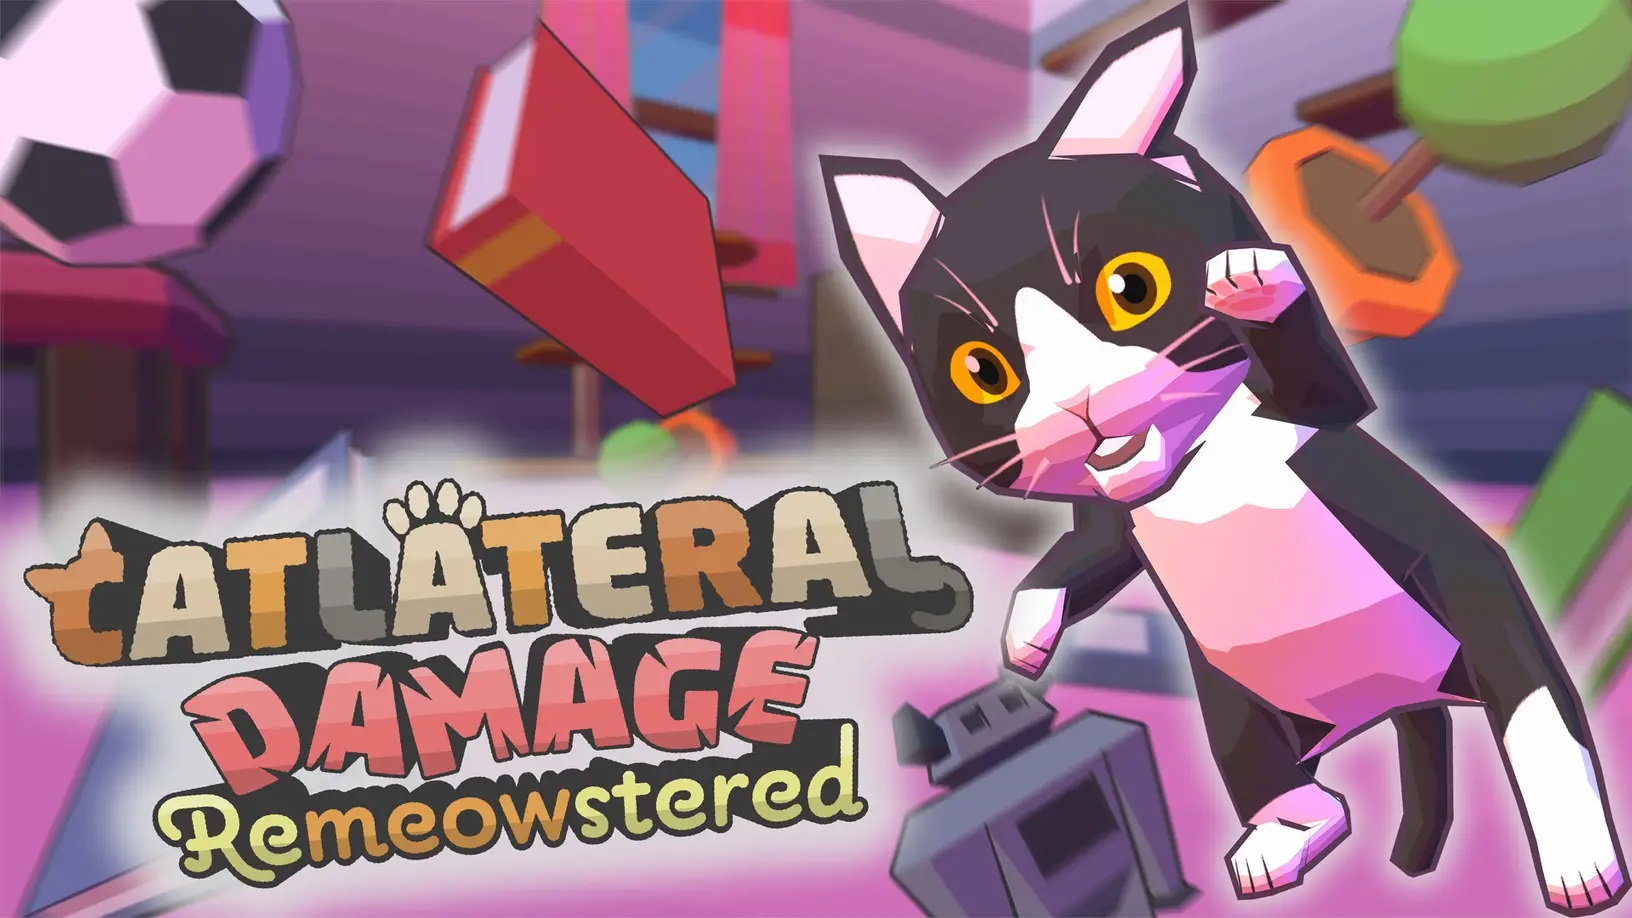 Catlateral Damage Remeostered 08 18 21 ၁